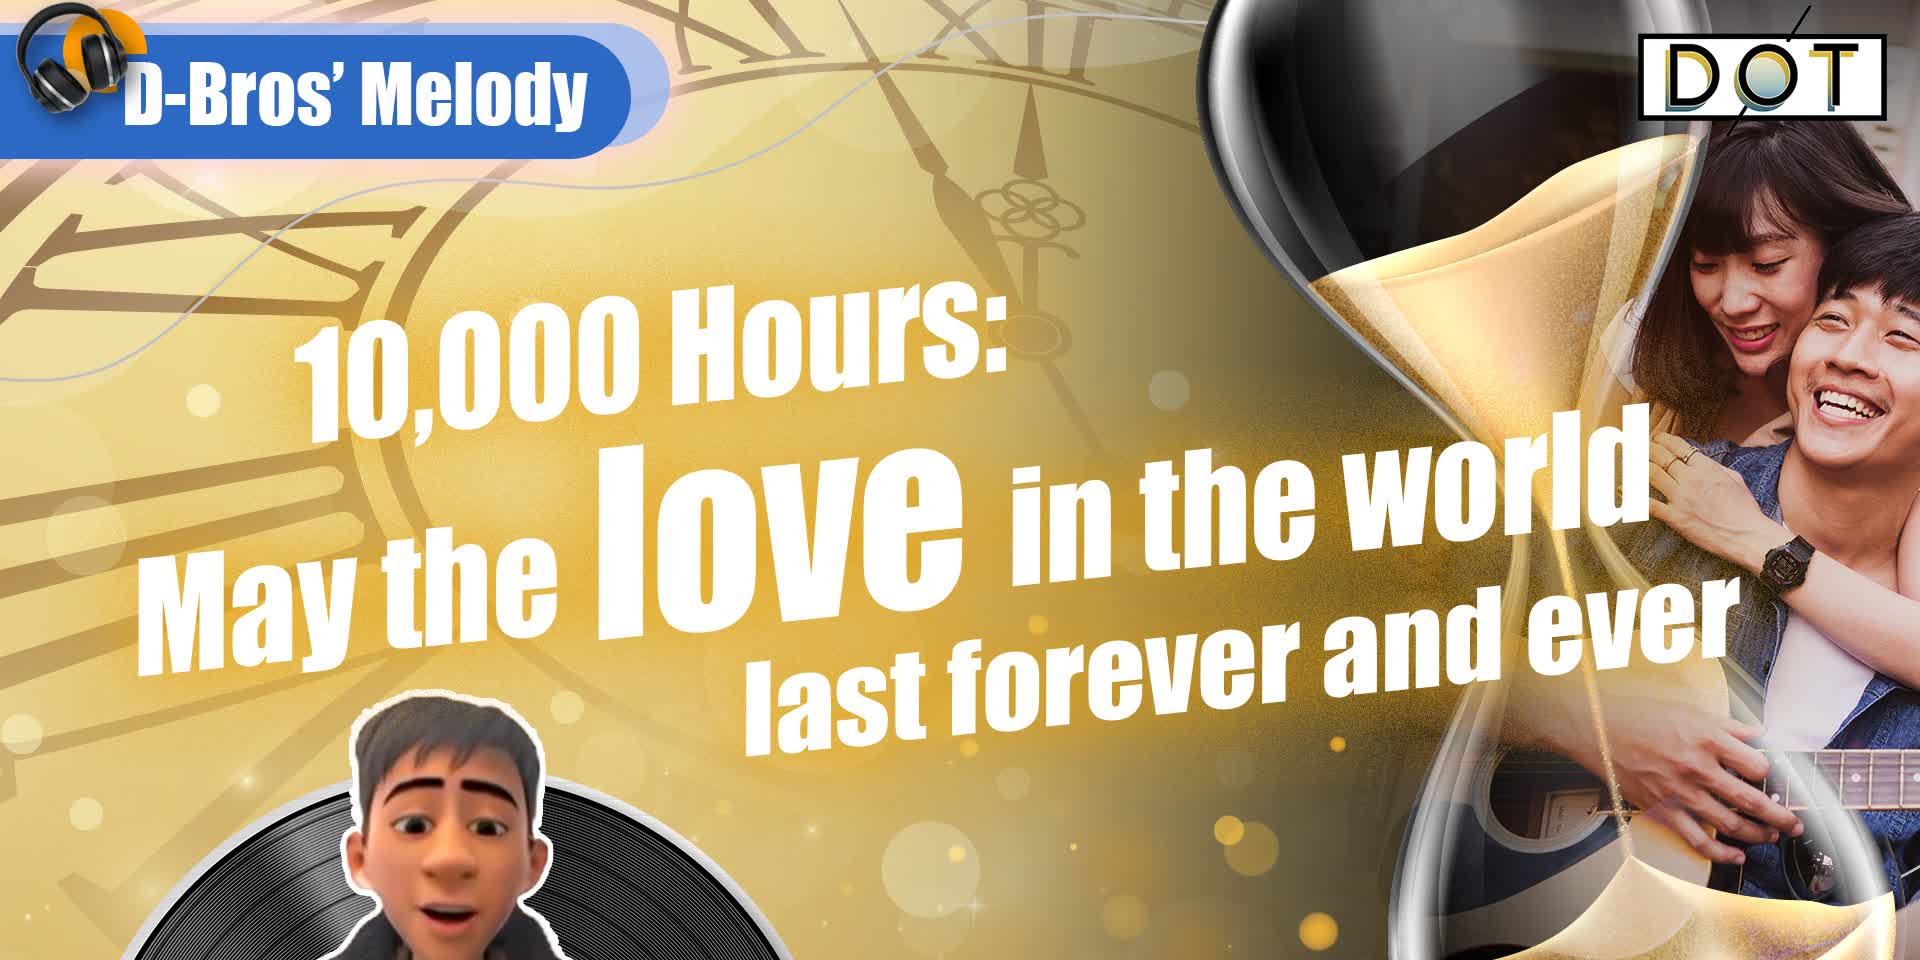 D-Bros' Melodies | 10,000 Hours: May the love in the world last forever and ever